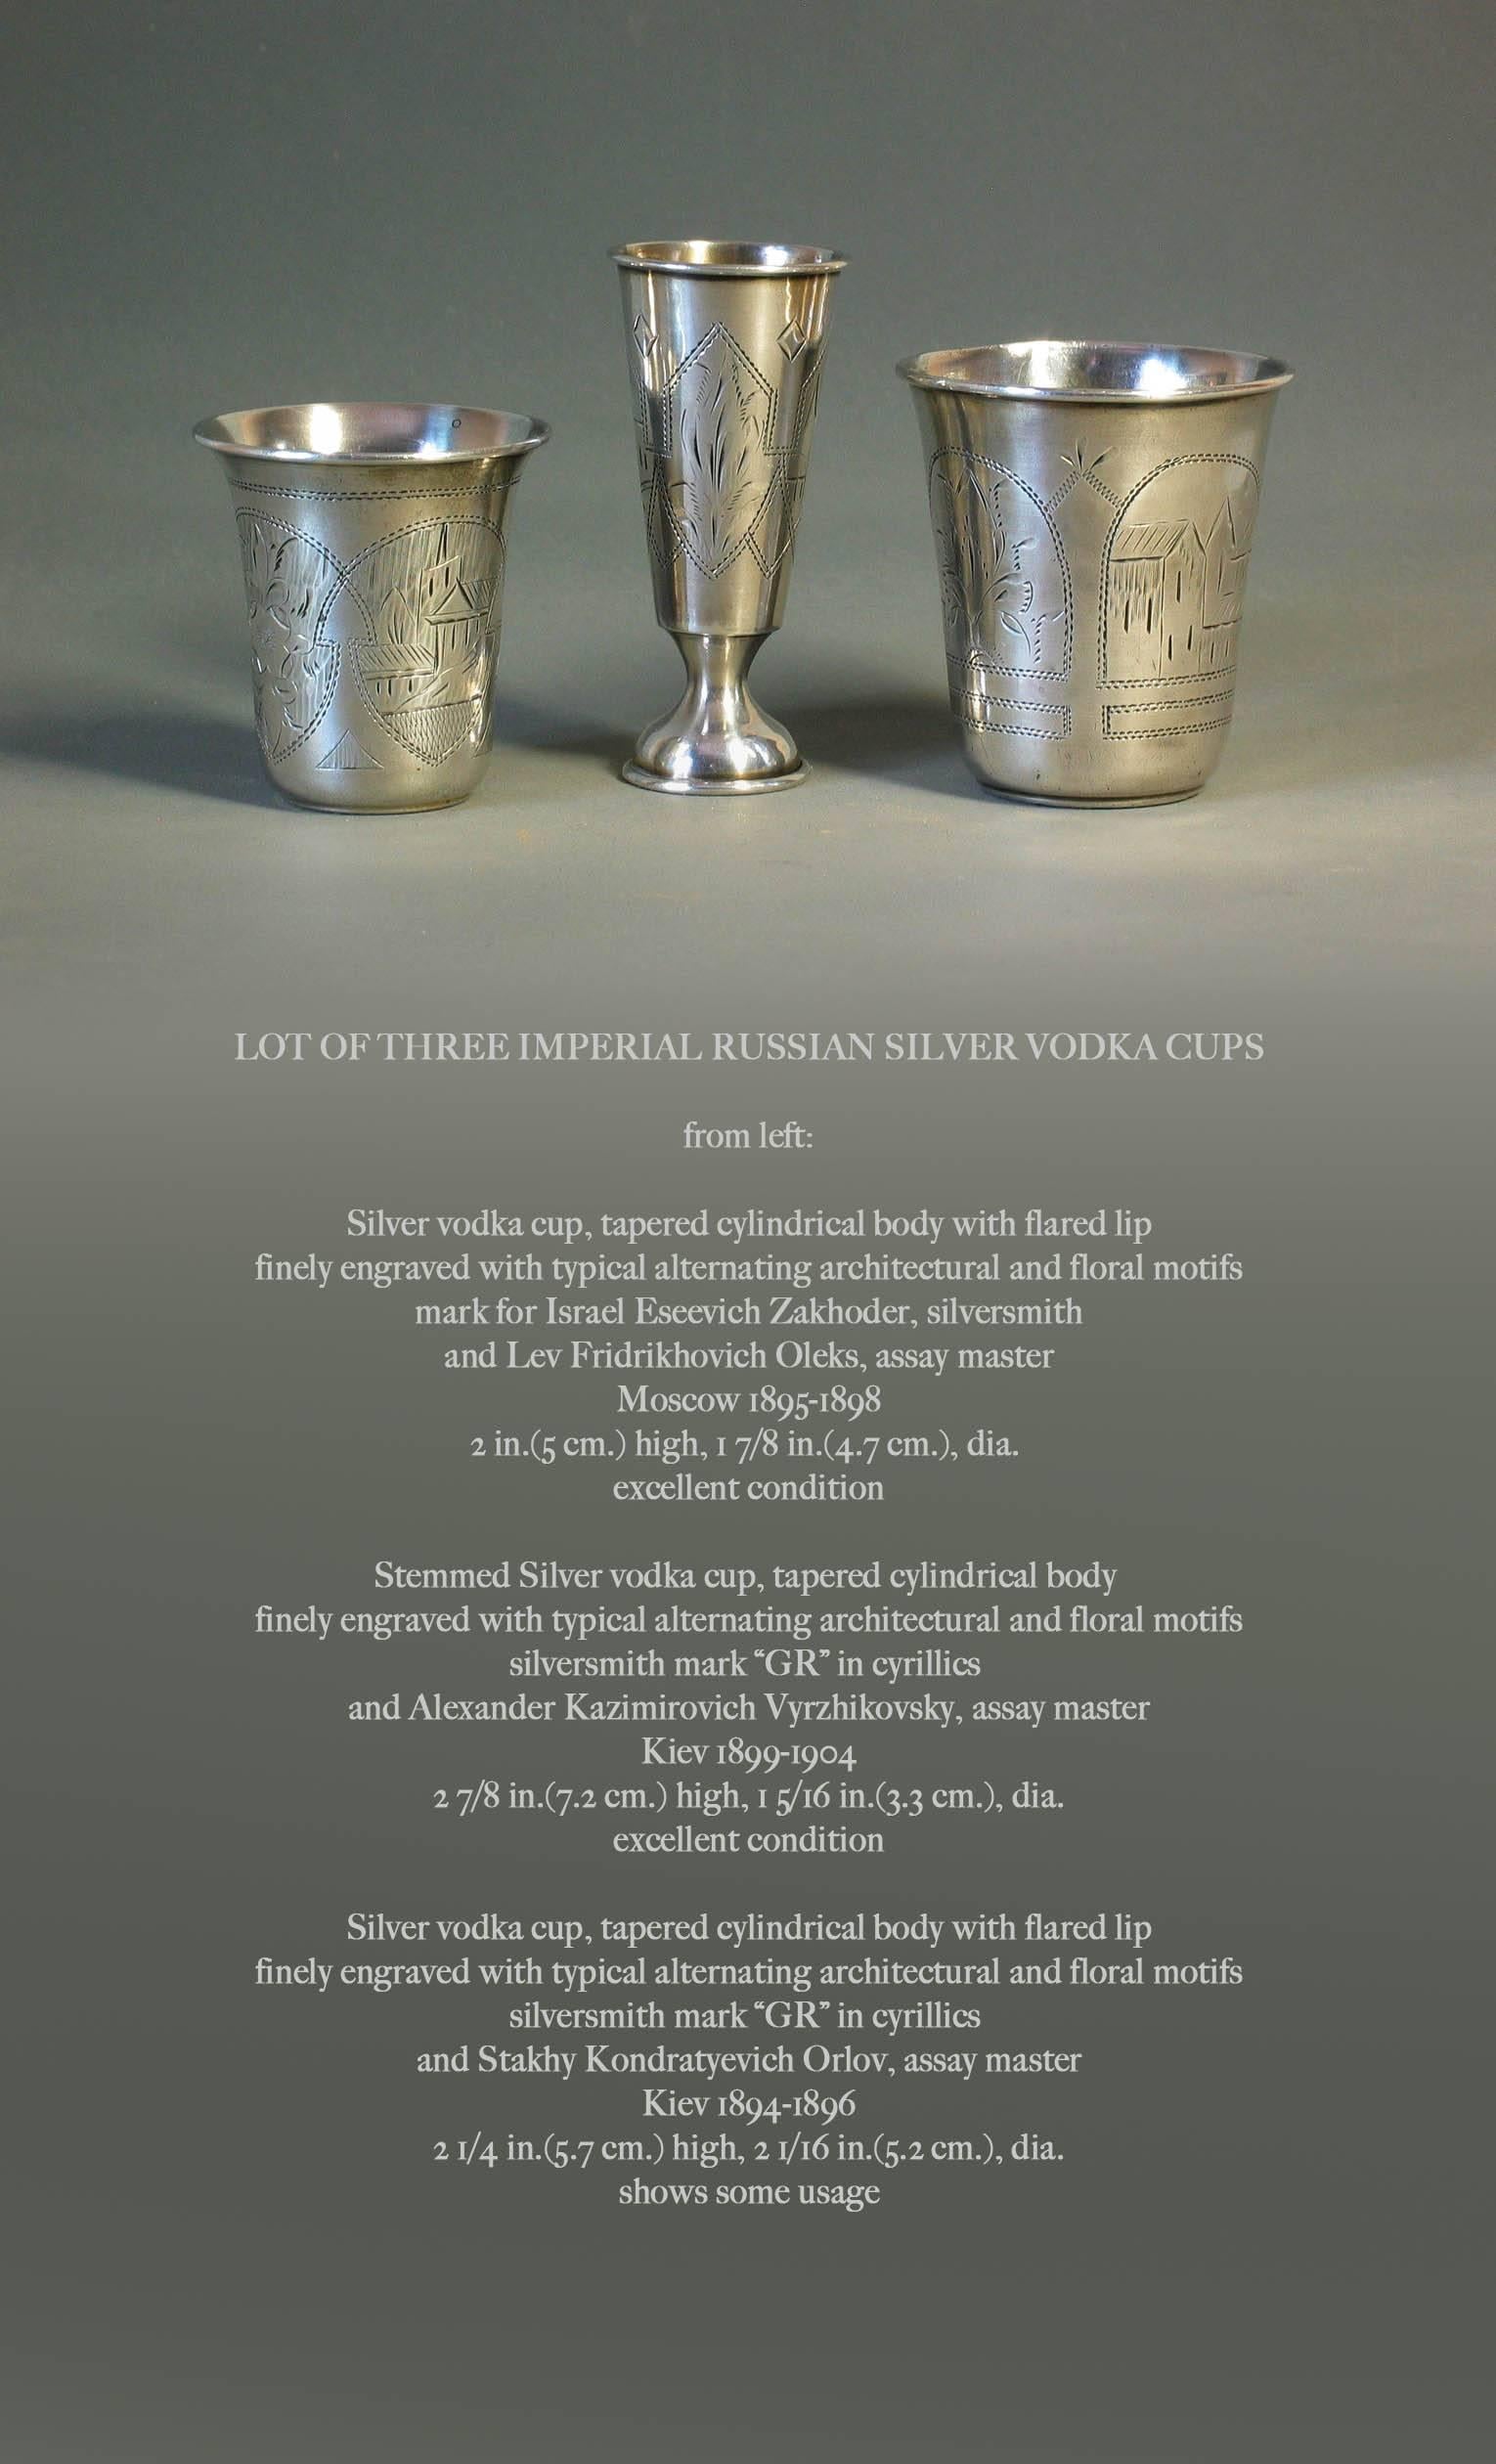 Lot of three Imperial Russian silver vodka cups, 
From the left:
Silver vodka cup, tapered cylindrical body with flared lip, finely engraved with typical alternating architectural and floral motifs. Mark for Israel Eseevich Zakhoder, Silversmith